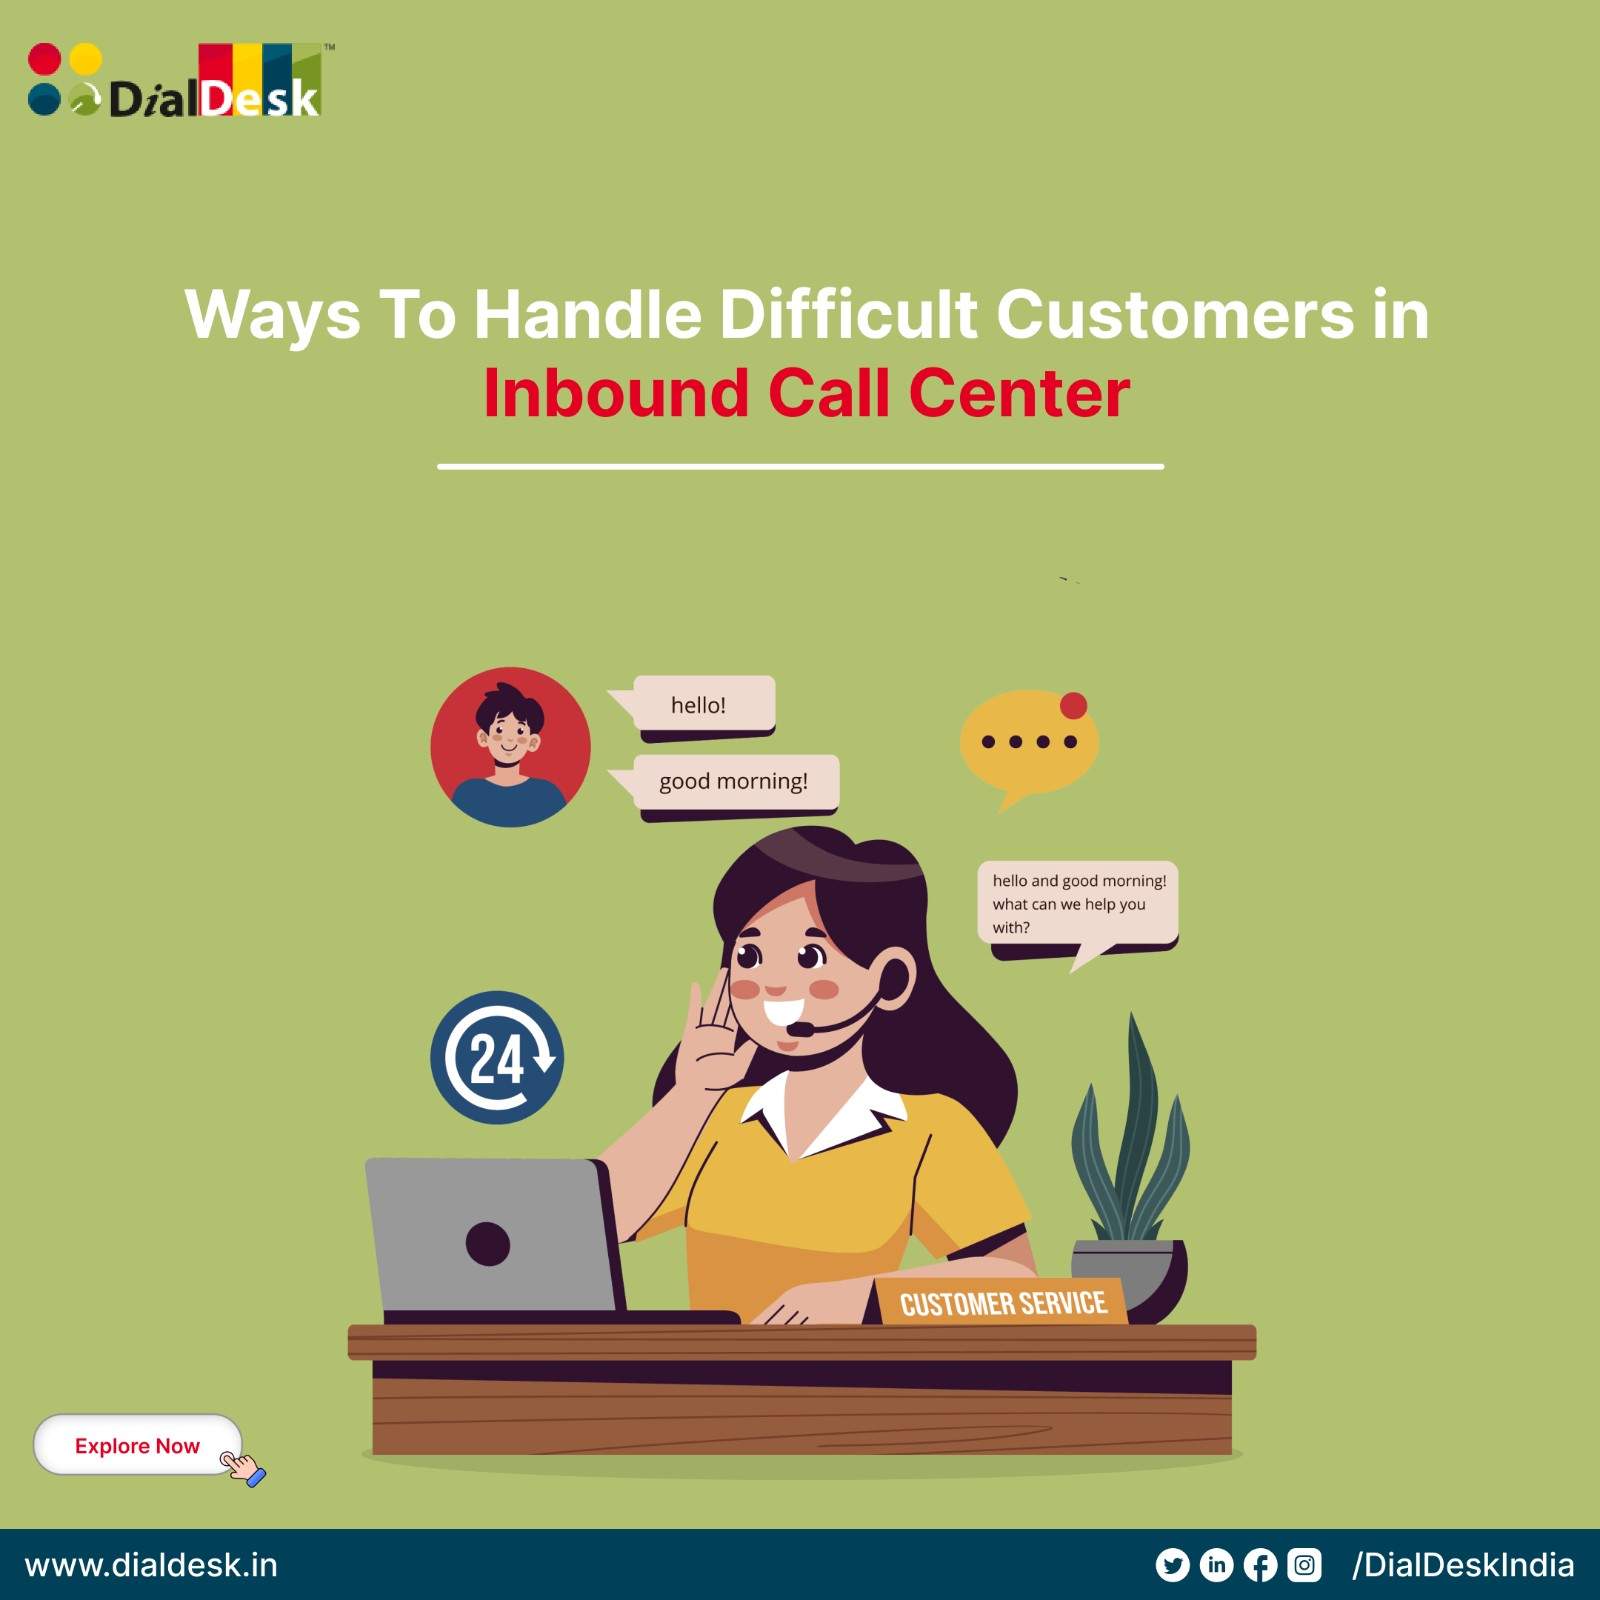 Ways To Handle Difficult Customers in Inbound Call Center